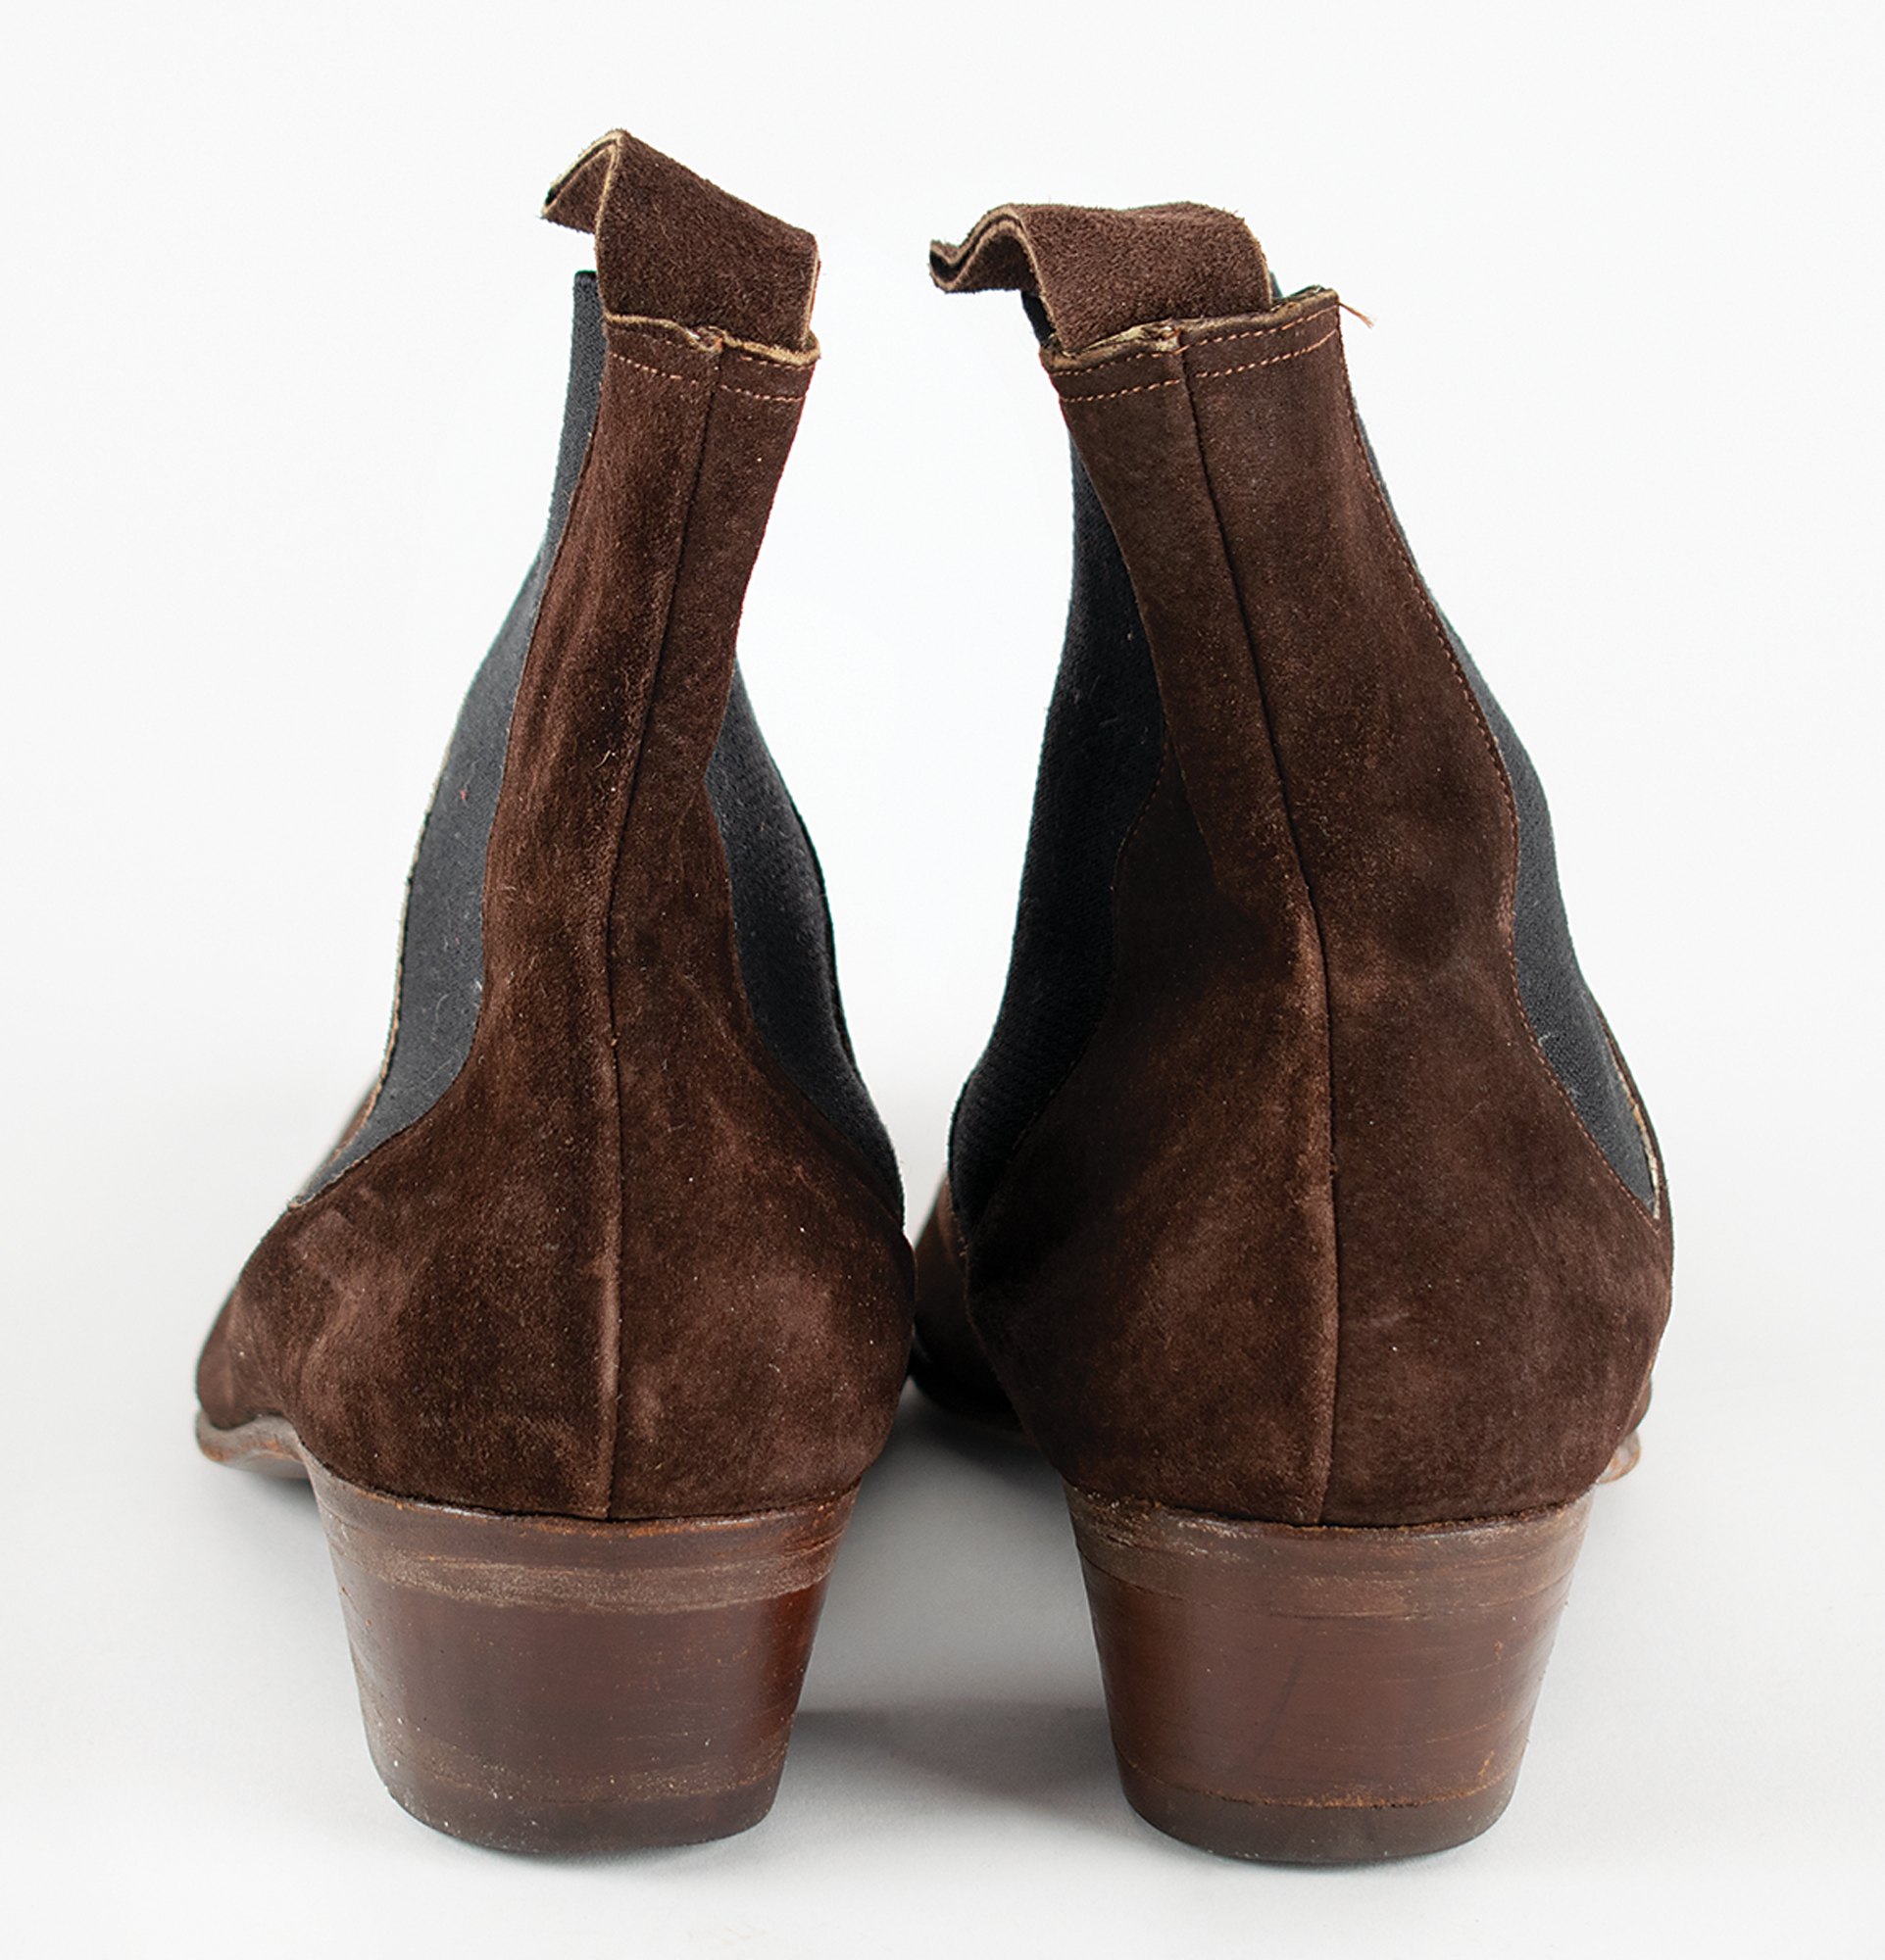 Tom Petty's Brown Suede Chelsea Boots | RR Auction